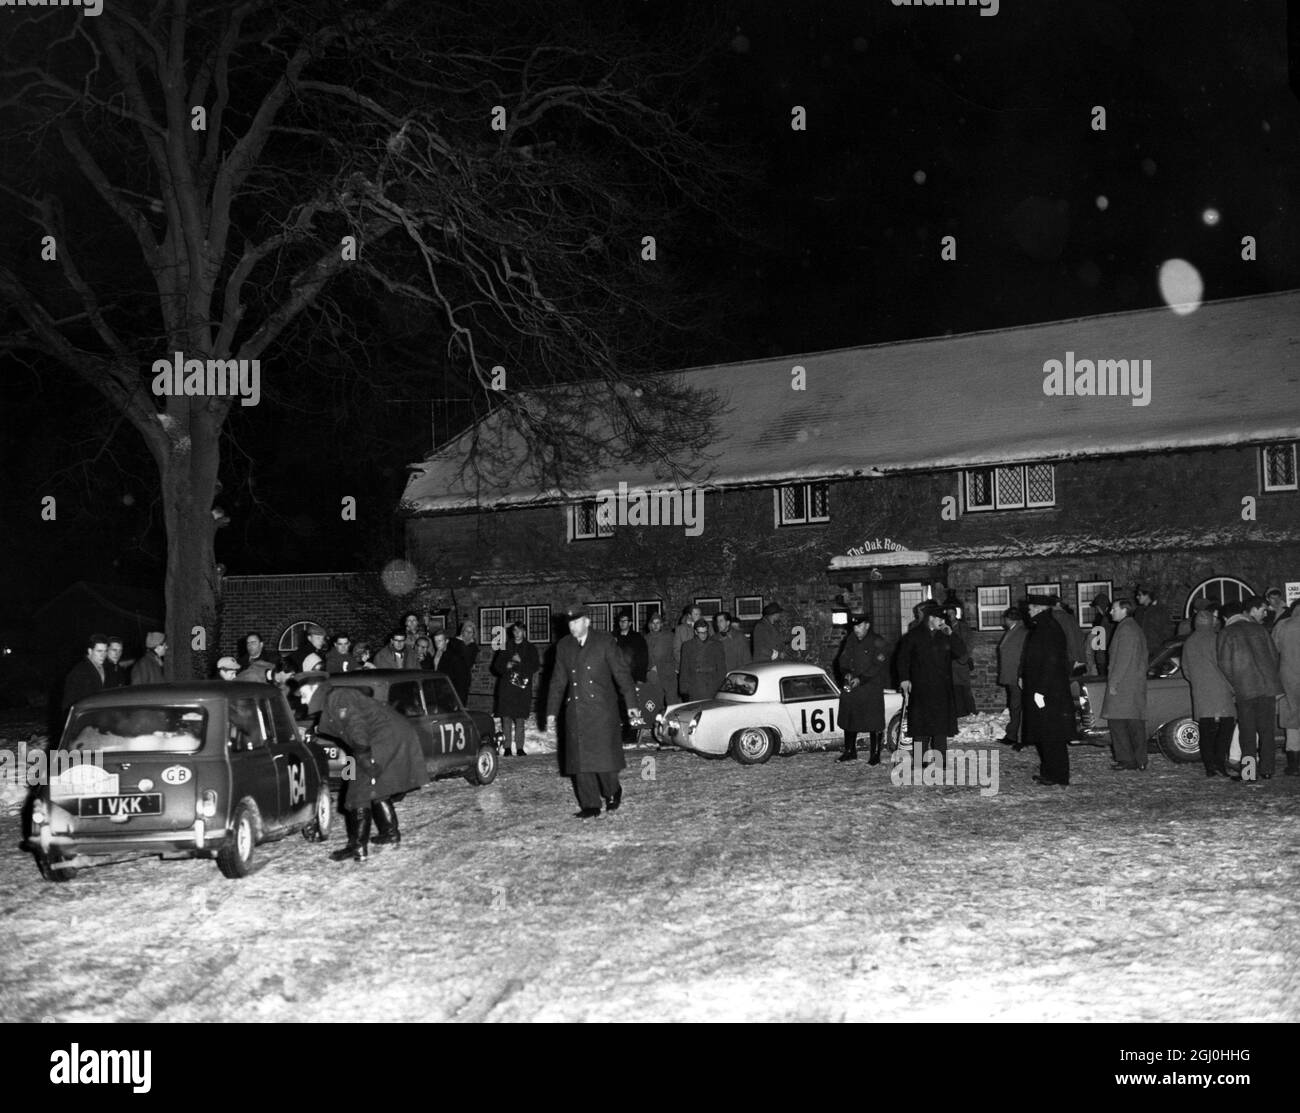 Arrivals at the passage control point at East Grinstead, Sussex (The Old Felbridge Hotel) of competitors in the Monte Carlo Rally. General view of cars arriving at the hotel. 19th January 1963. Stock Photo